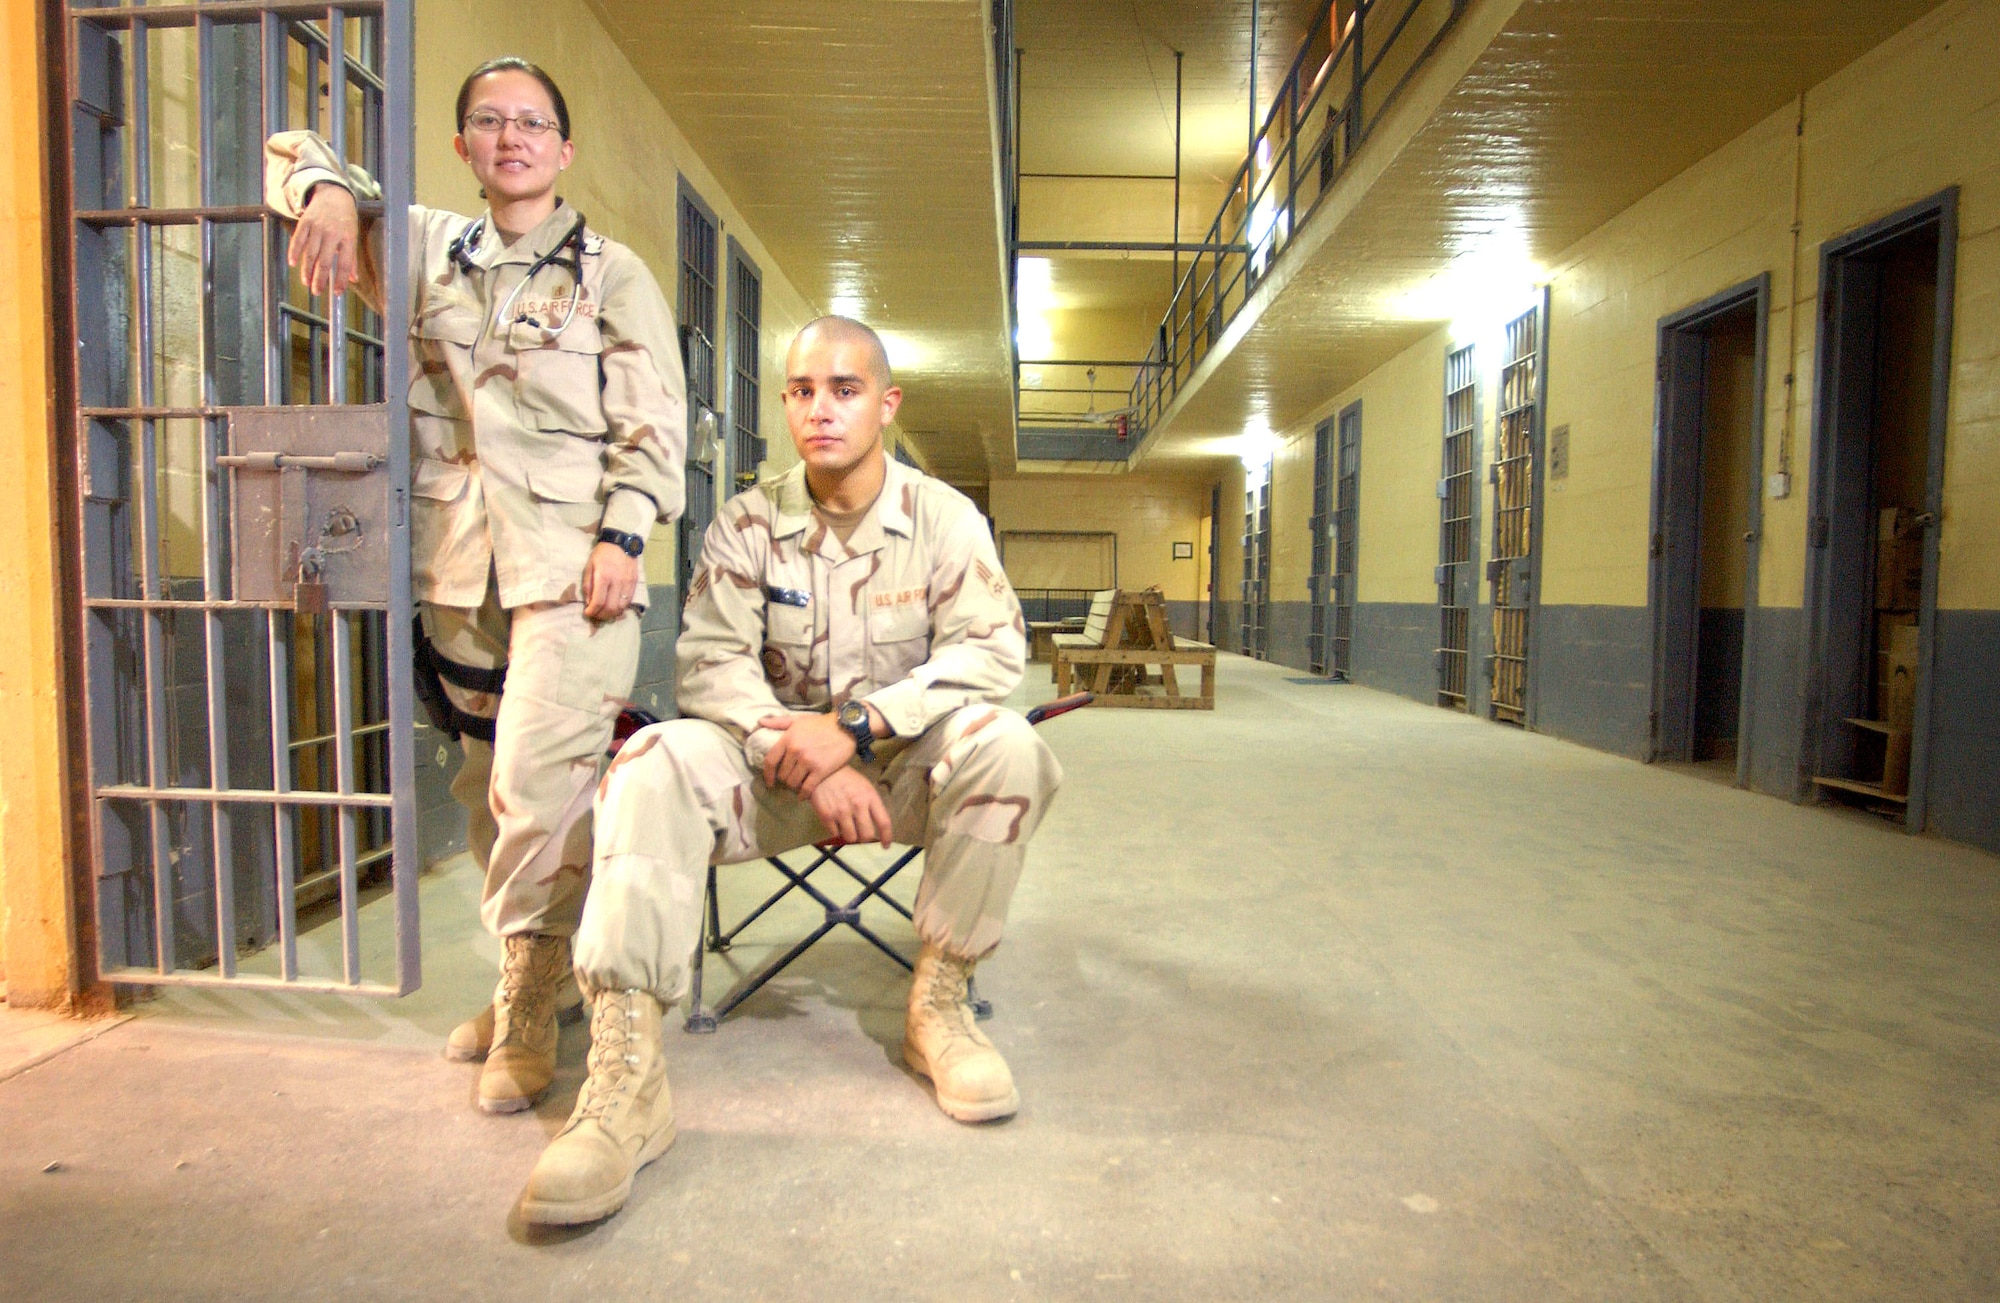 ABU GHRAIB, Iraq -- Major Carol and Senior Airman Estaban, whose last names are withheld for security purposes, are part of an independent group of Air Force medics who maintain the health of detainees at Abu Ghraib prison.  The people serving at the prison live in the cell blocks that once housed victims of Saddam Hussein's regime.  (U.S. Air Force photo by Master Sgt Scott Wagers)